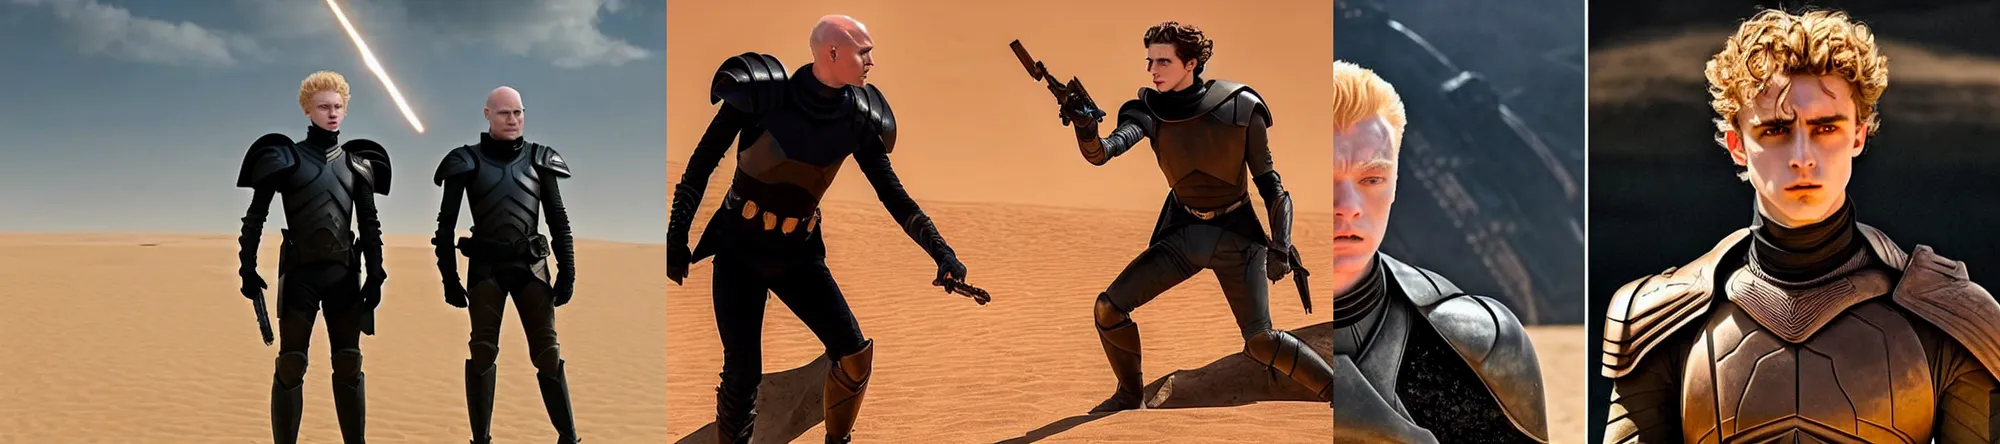 Prompt: a duel between bald_ominous_brooding_Austin_Butler_as_Feyd-Rautha_Harkonnen against Timothee_Chalamet_as_Paul_Atreides, in an arena in movie Dune-2021, golden ratio, clear gaze, detailed eyes